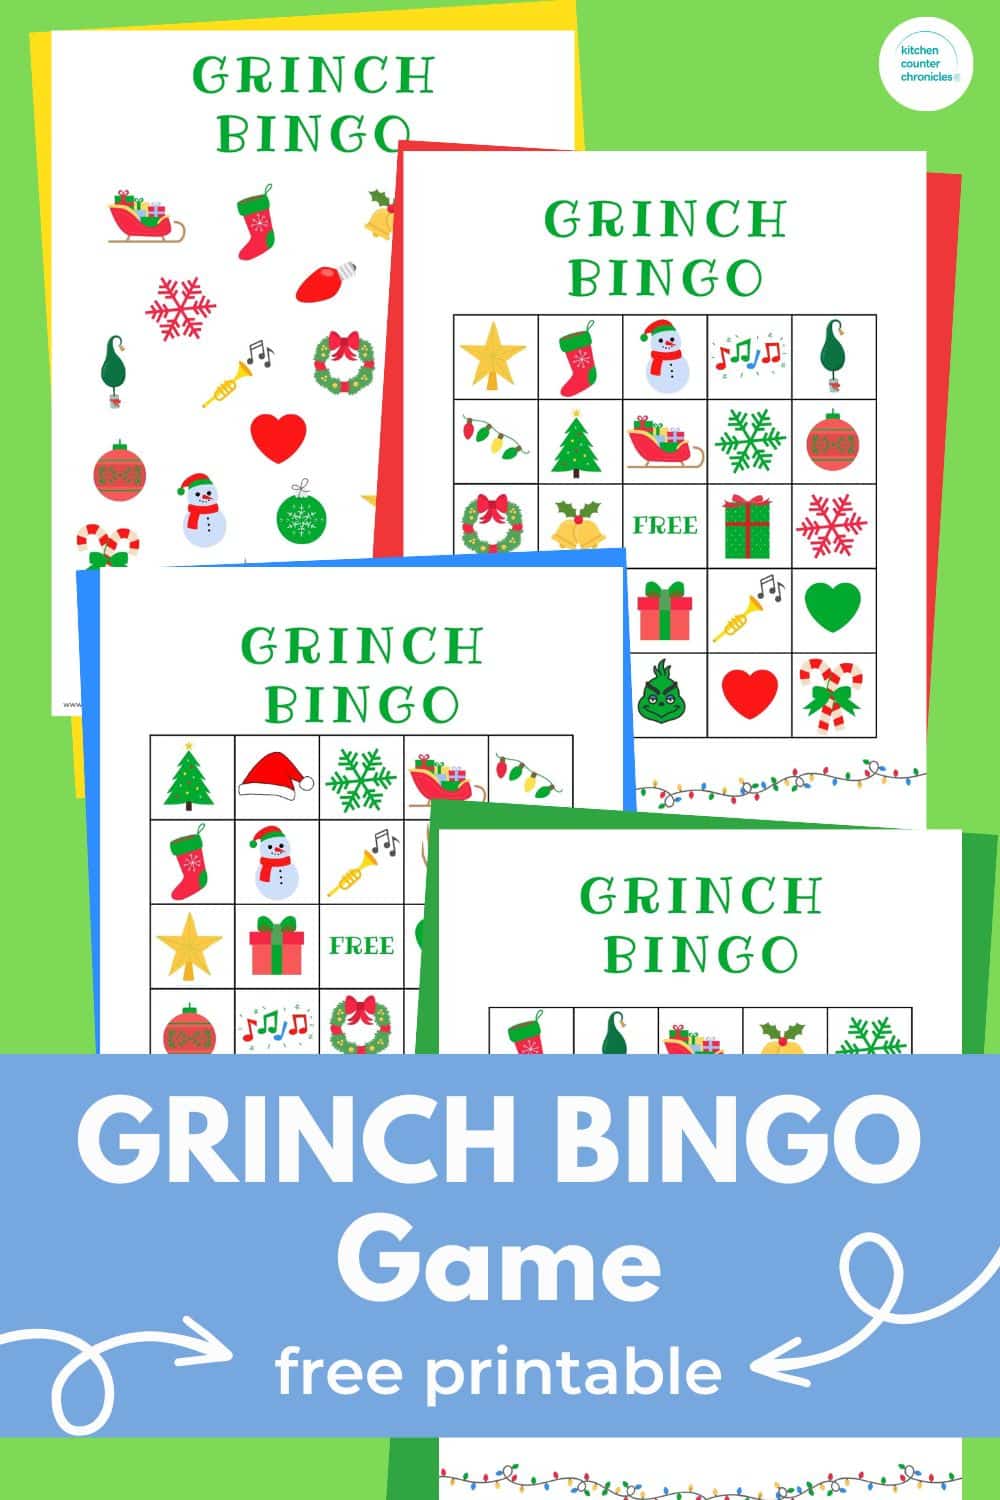 title "Printable Grinch Bingo Game - Free Printable" with 4 Grinch bingo cards printed and a green background